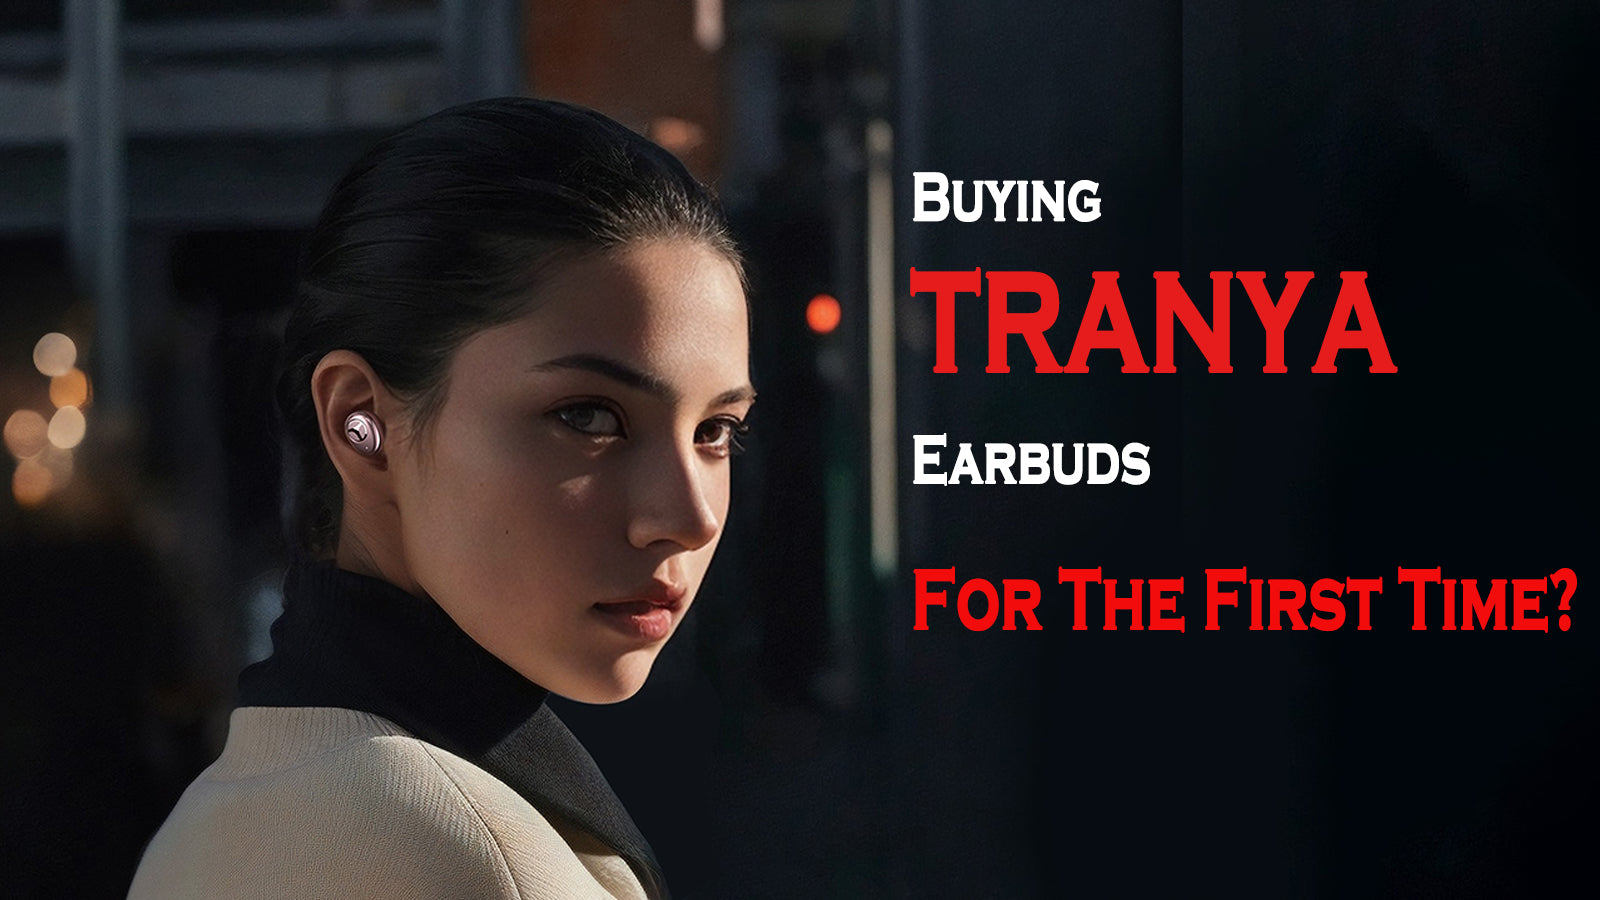 Buying TRANYA Earbuds For The First Time? Here's What You Need To Know!